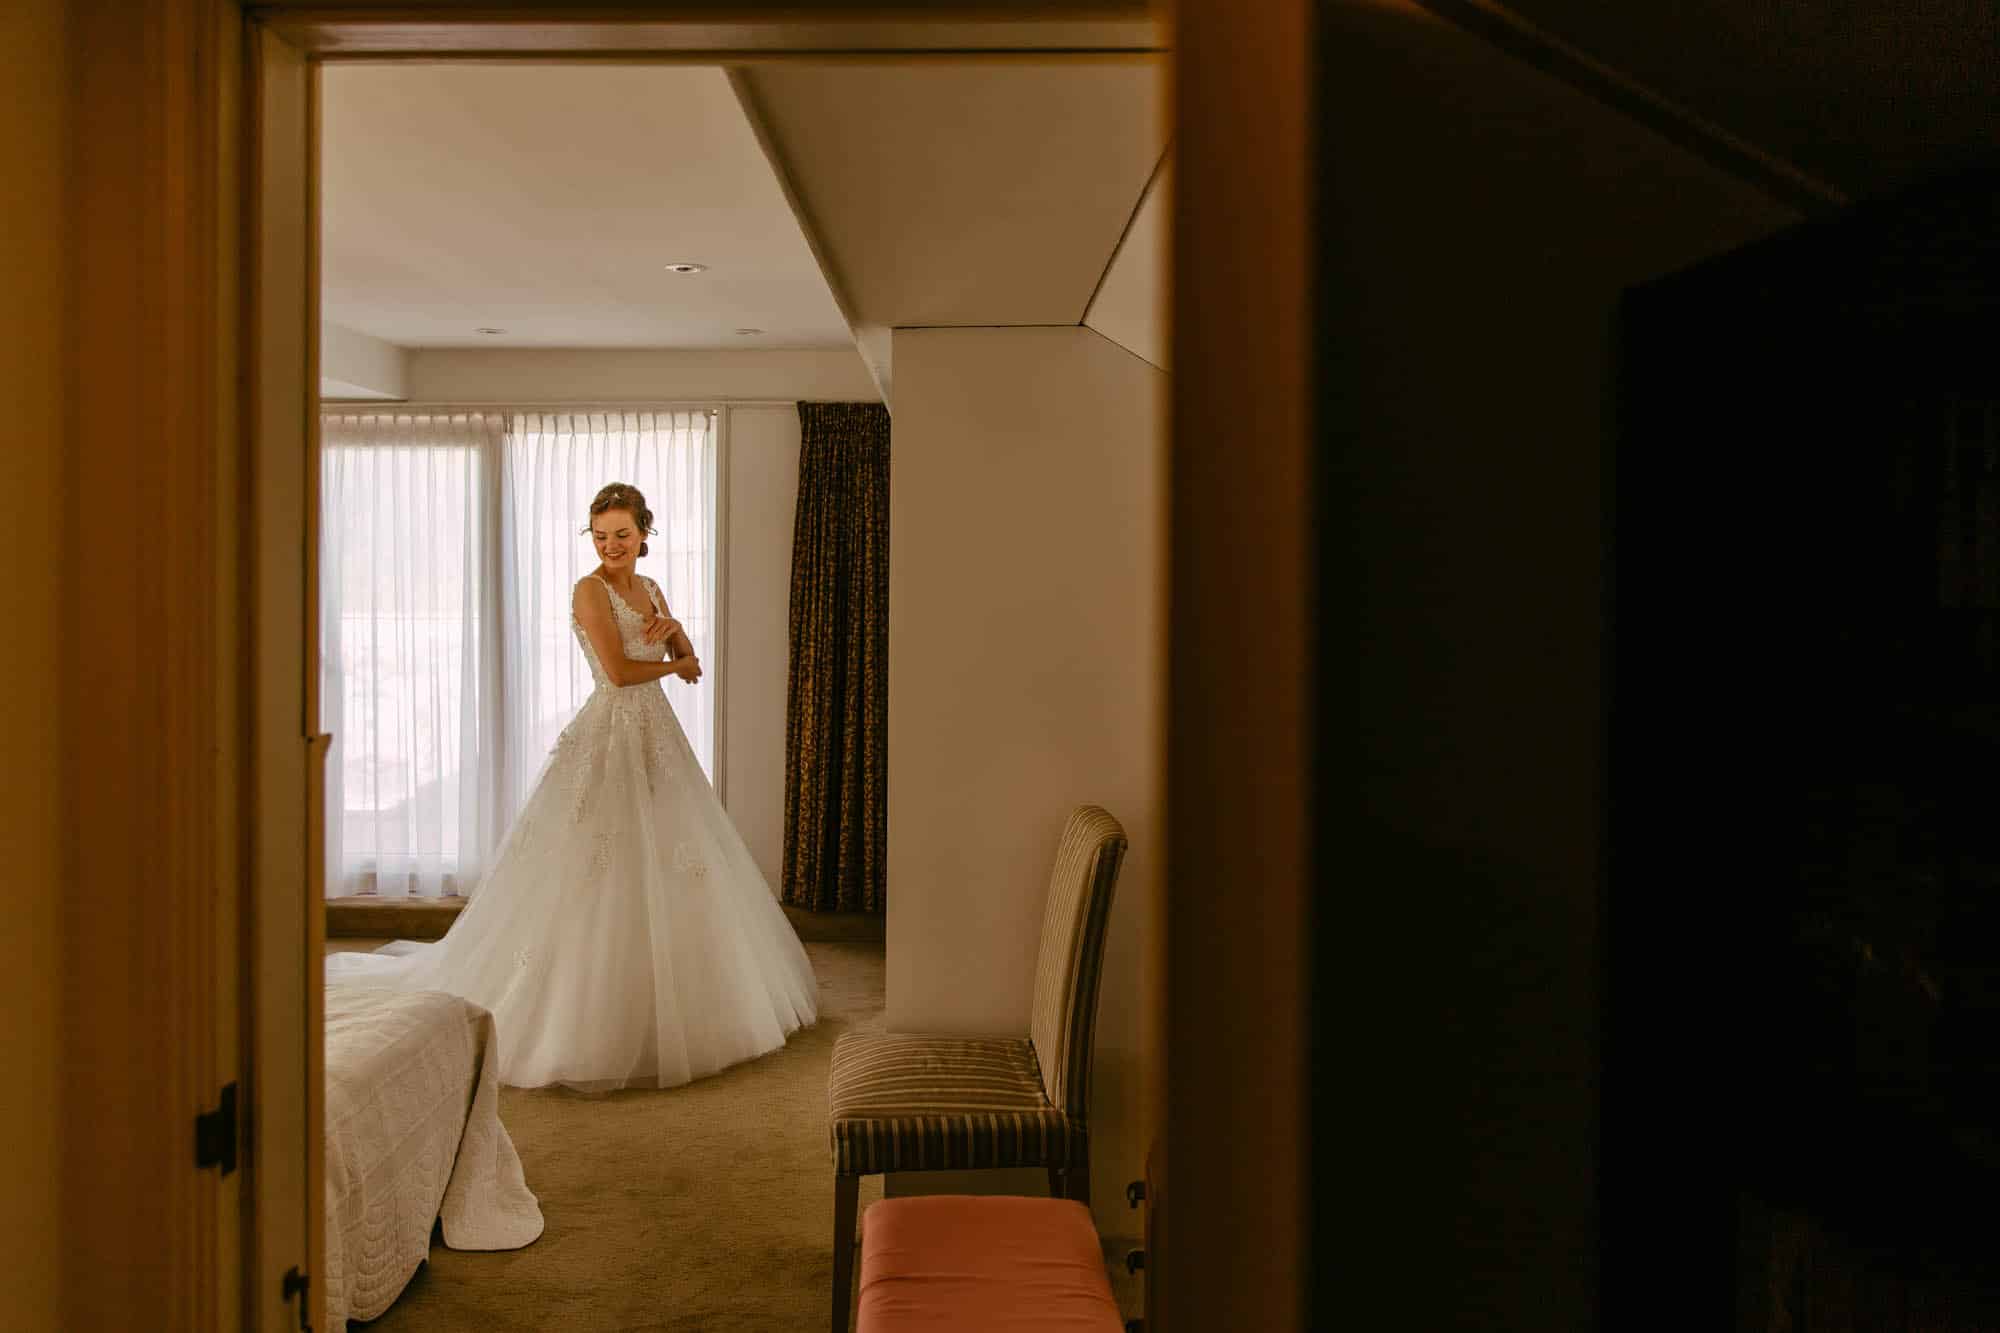 A bride dressed in an A-line wedding dress, standing in a room.